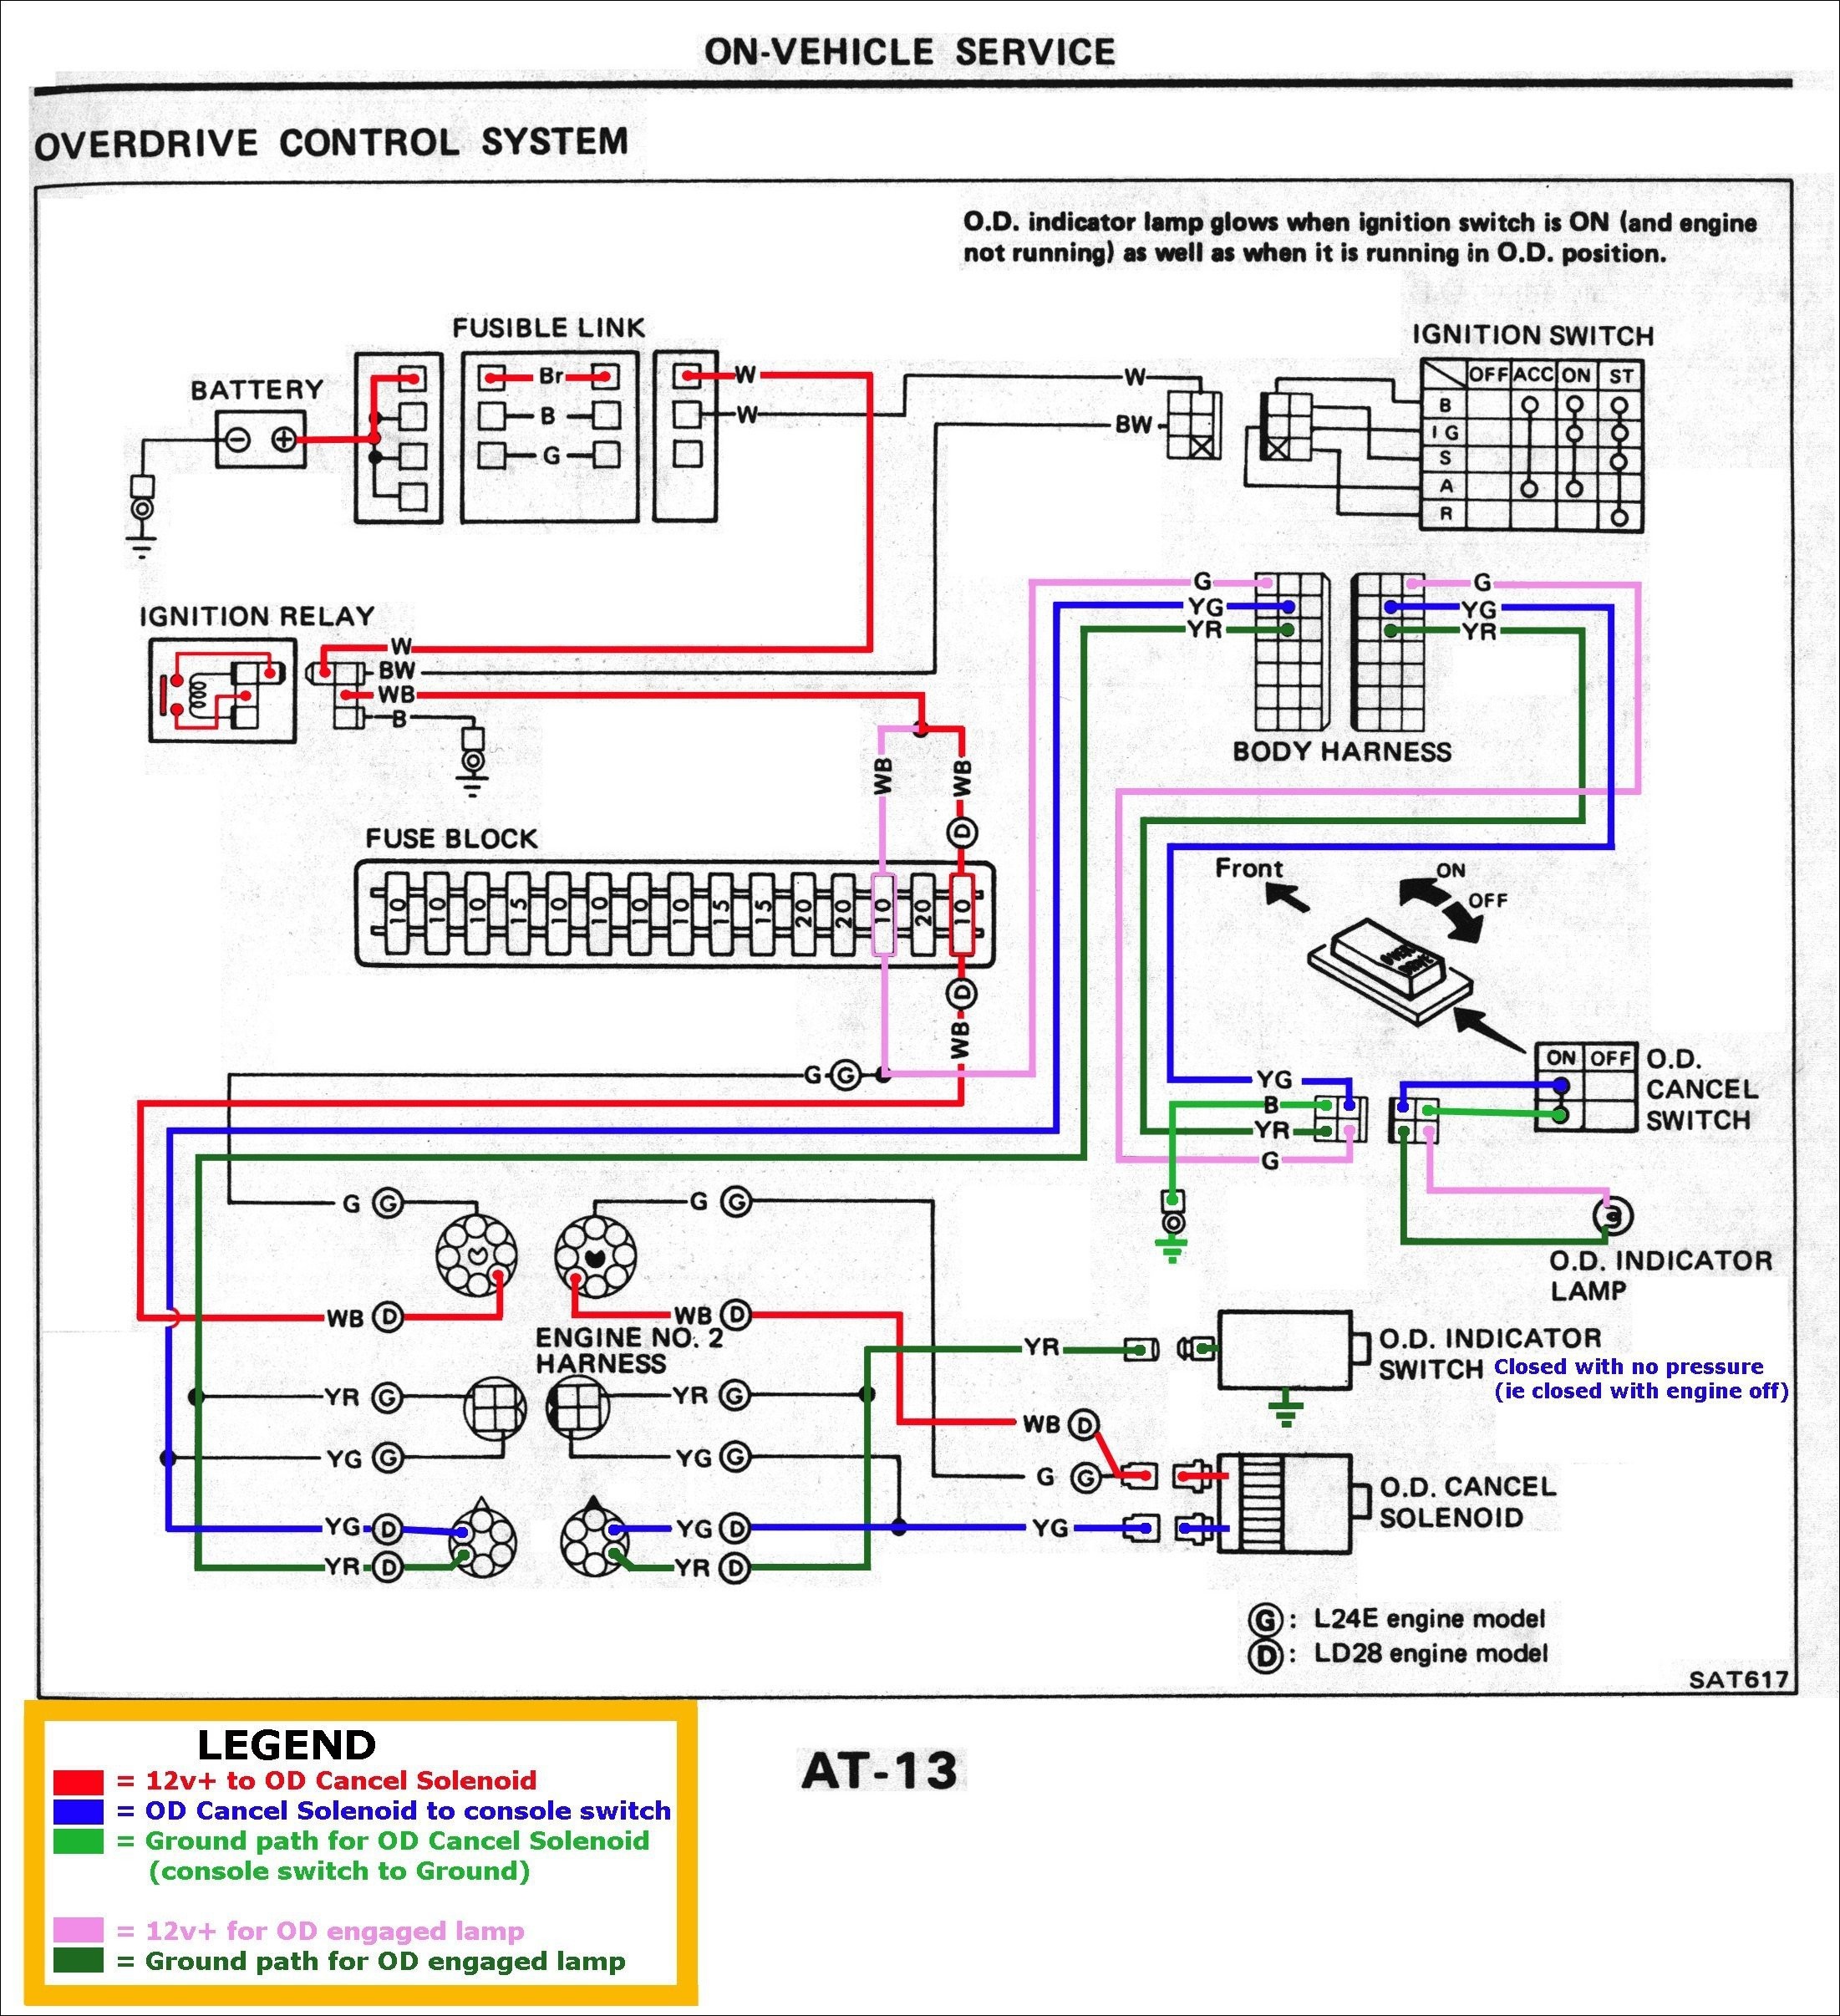 Car Audio Wiring Diagrams Reference 2005 Nissan Altima Radio Wiring Diagram Fresh Factory Car Stereo